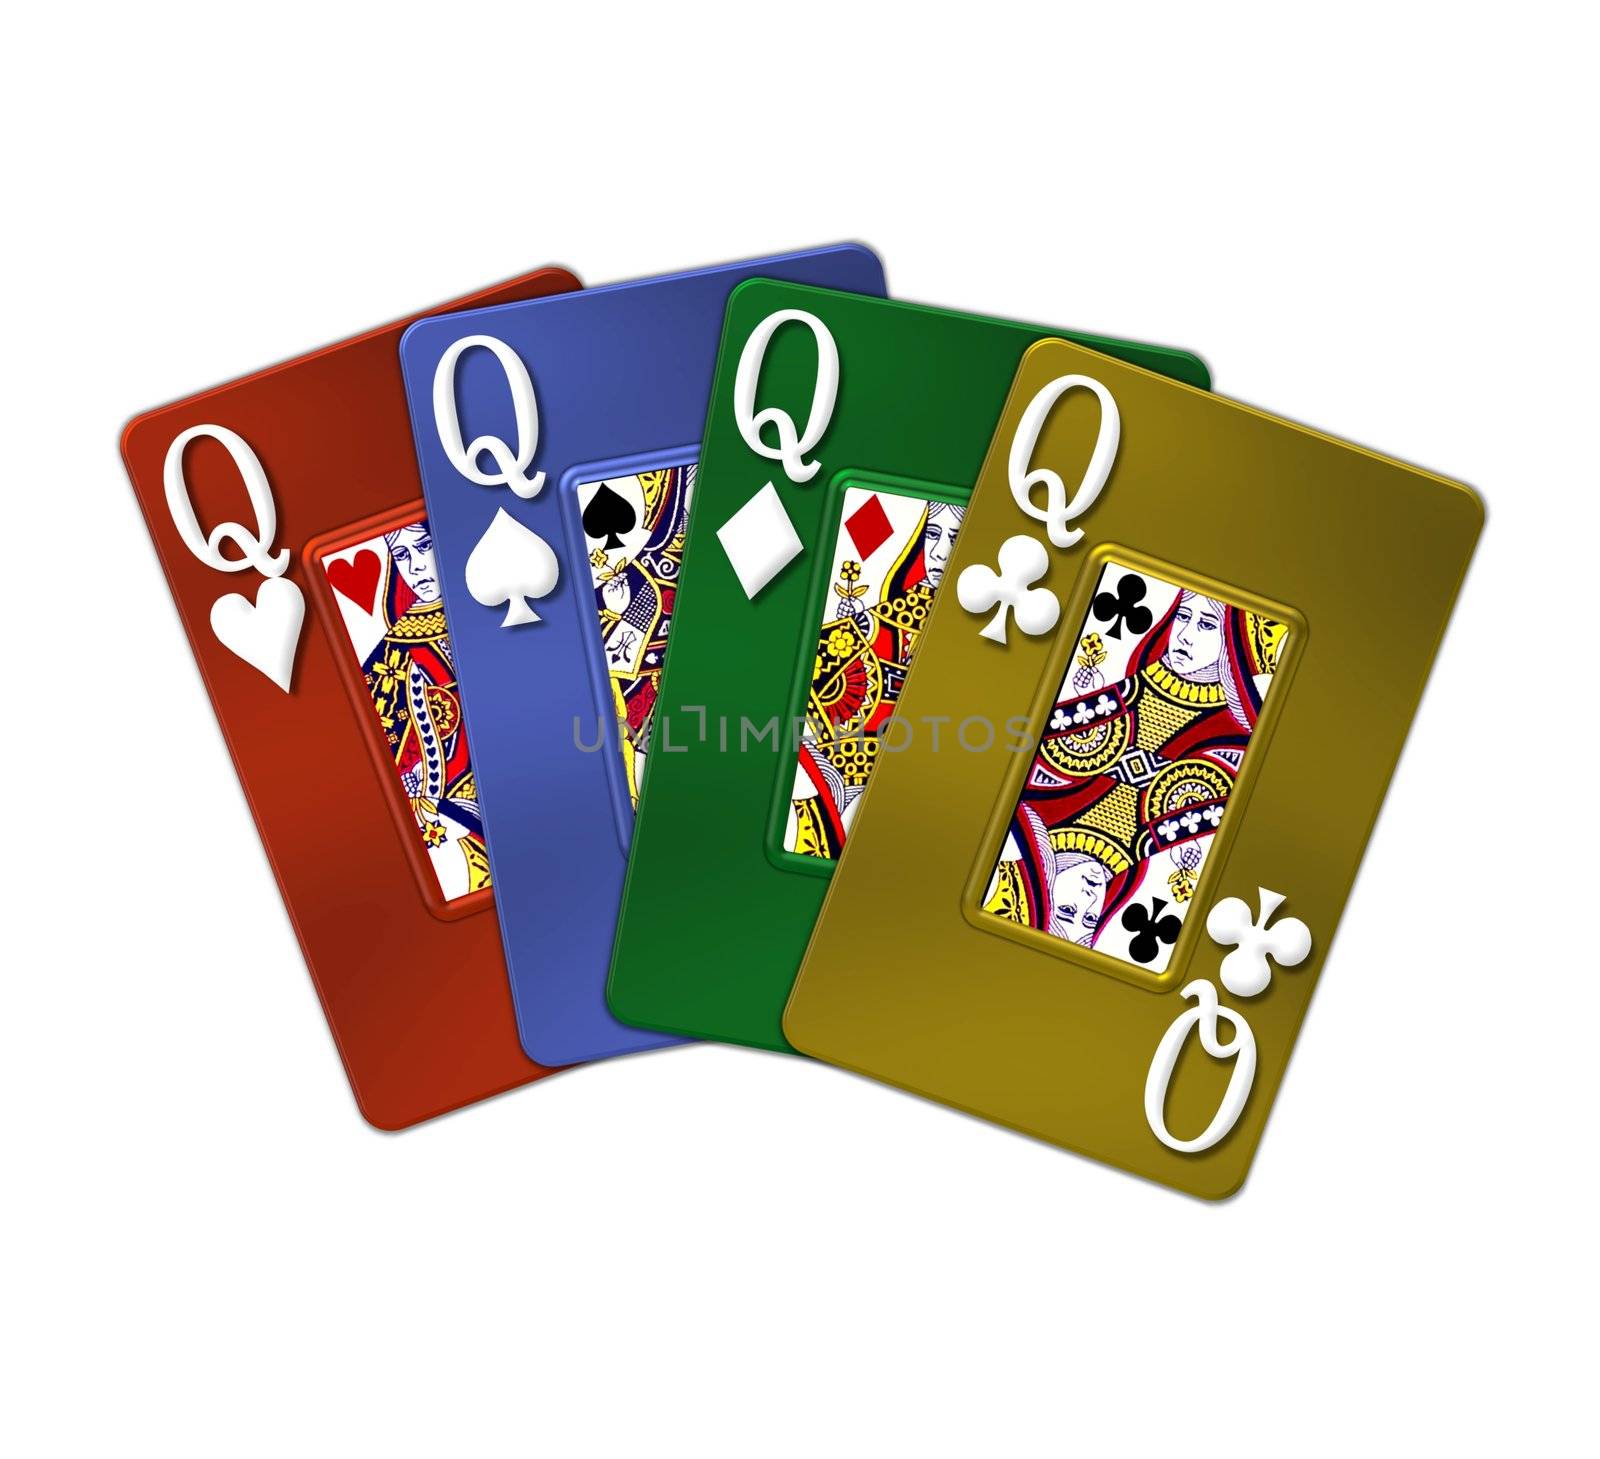 illustration of metallic poker cards - 4 of a kind queens by peromarketing